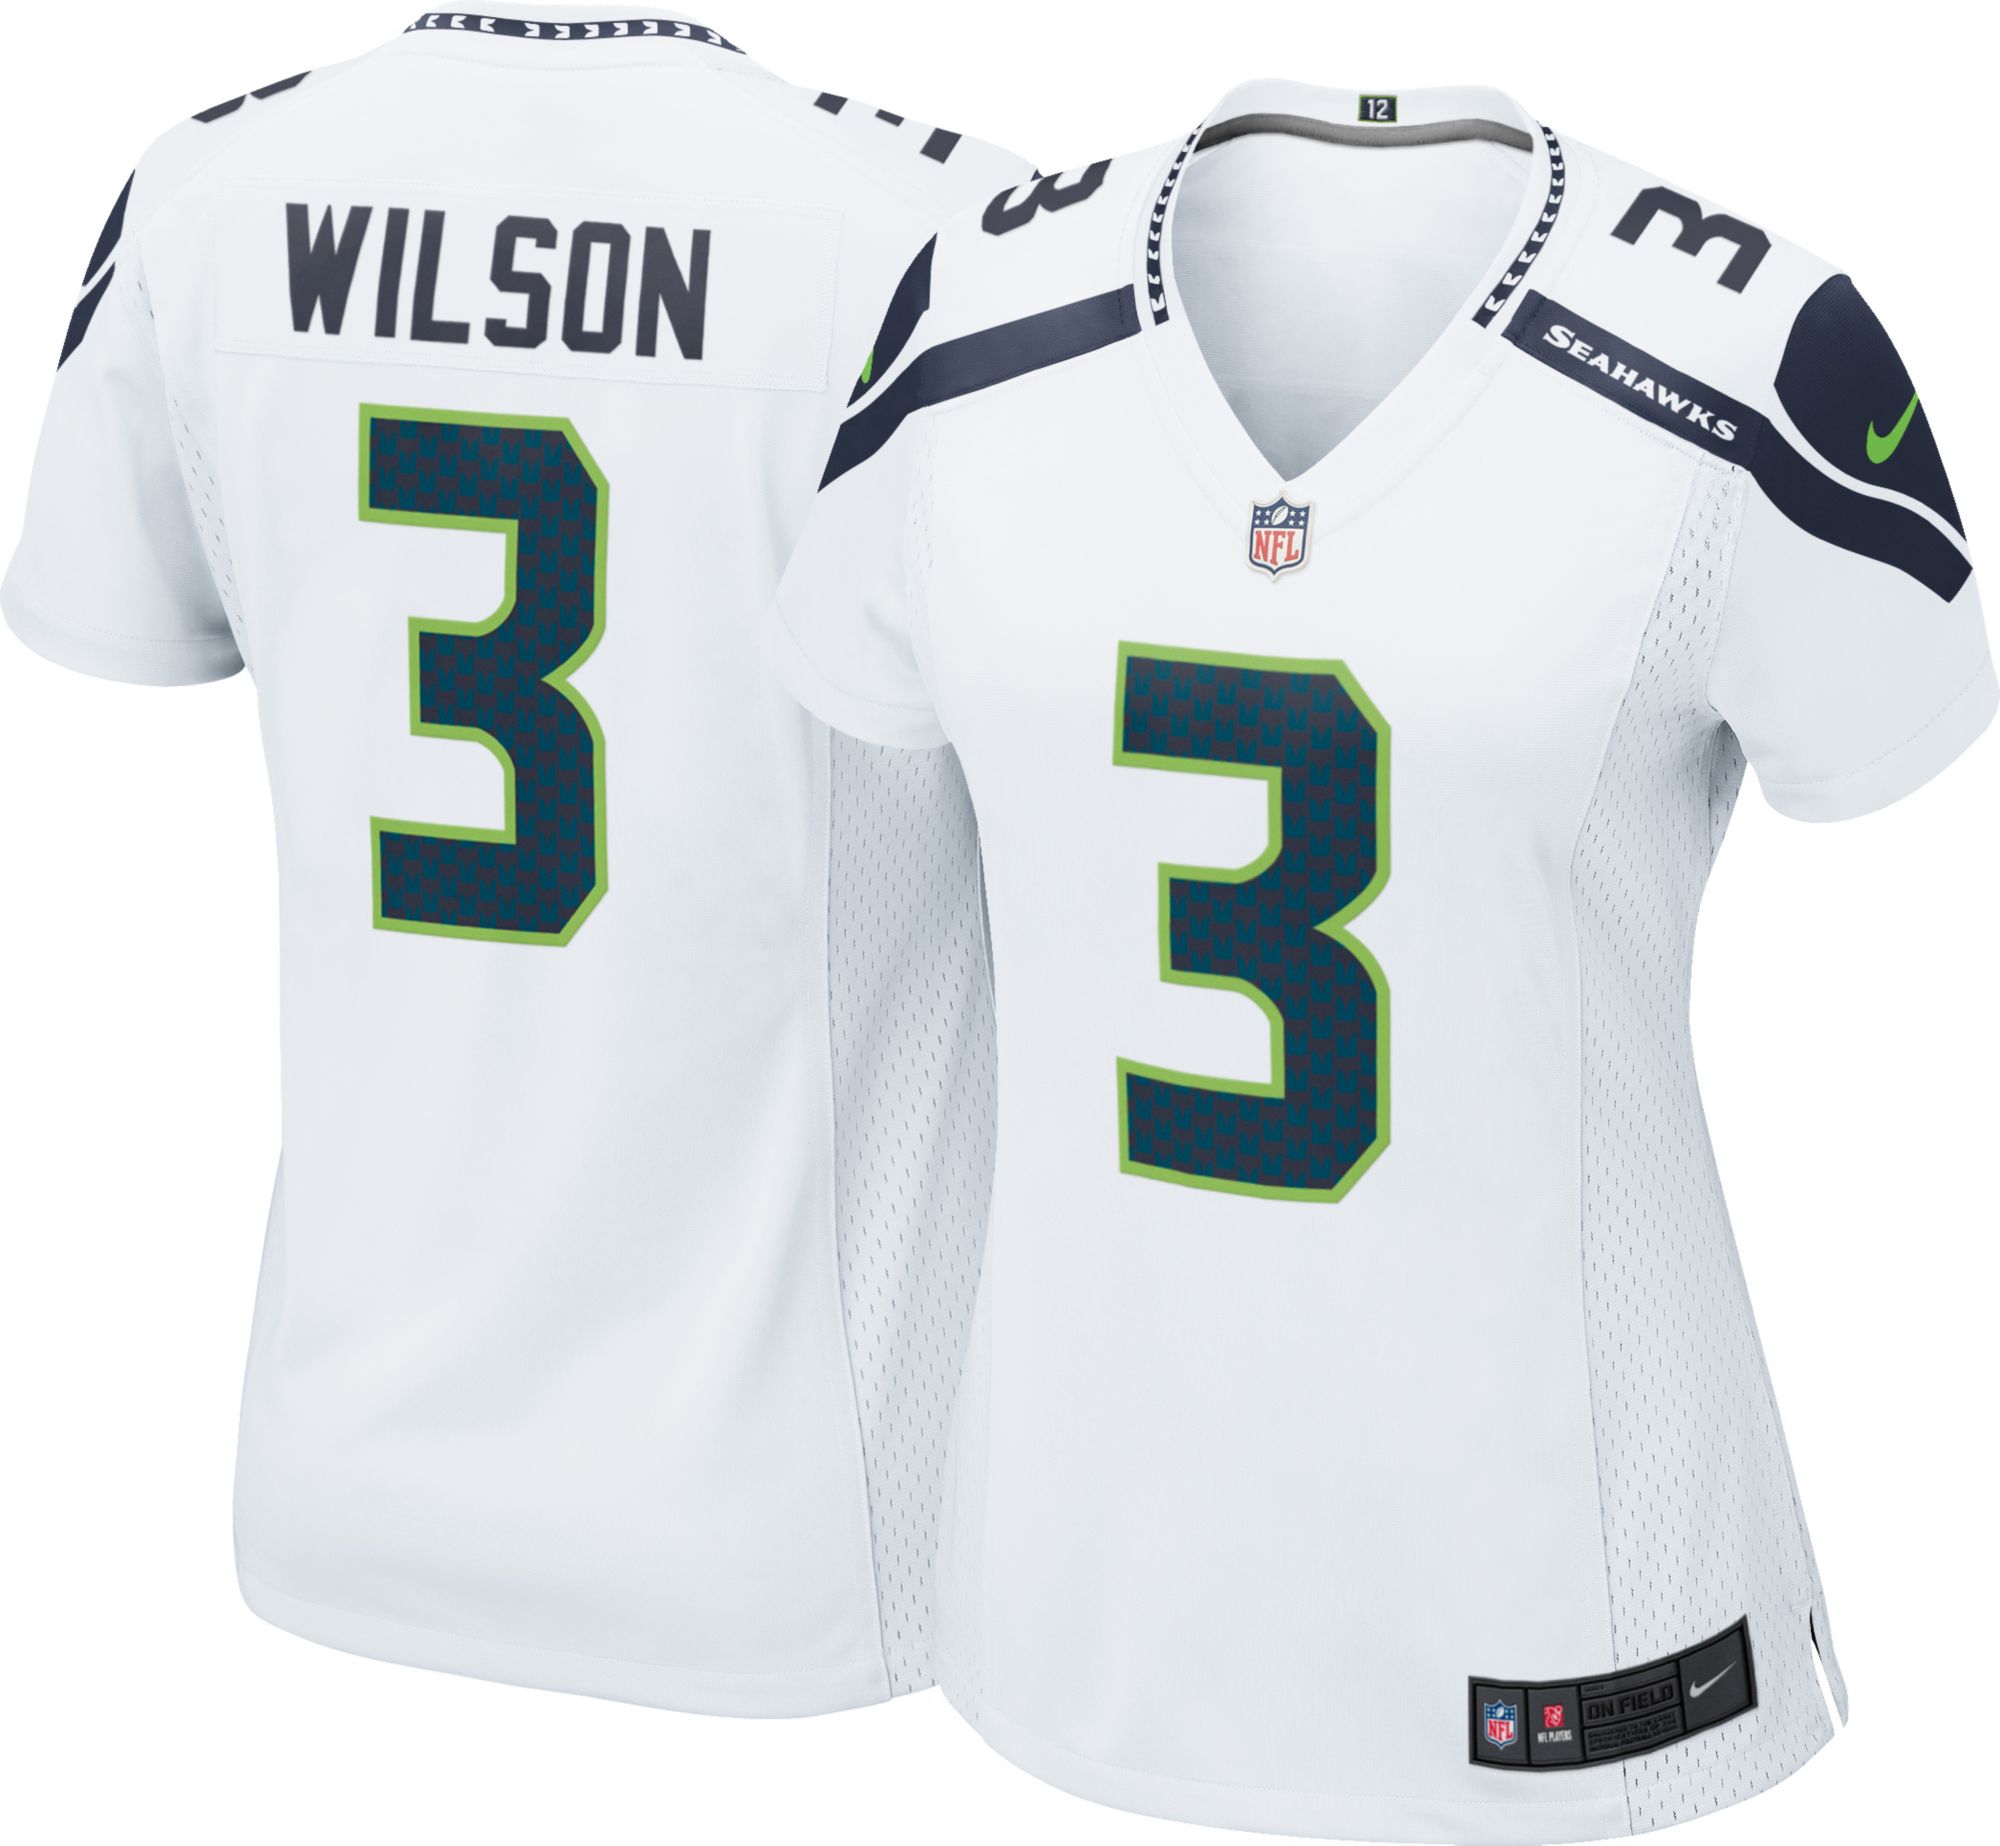 russell wilson jersey youth small